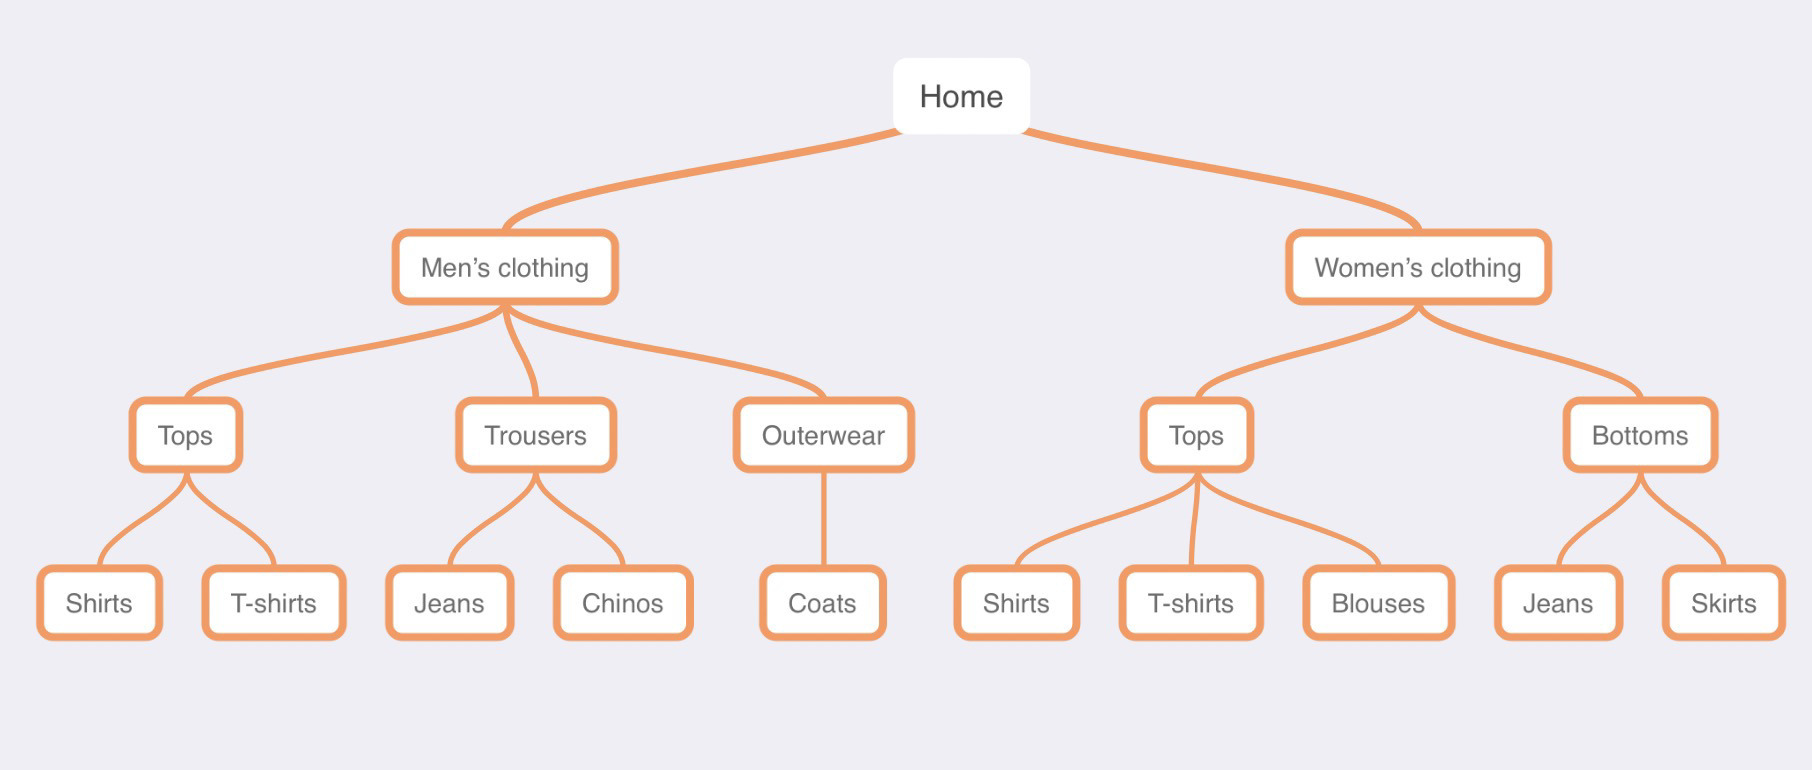 How to Structure Your Website's Architecture for SEO |